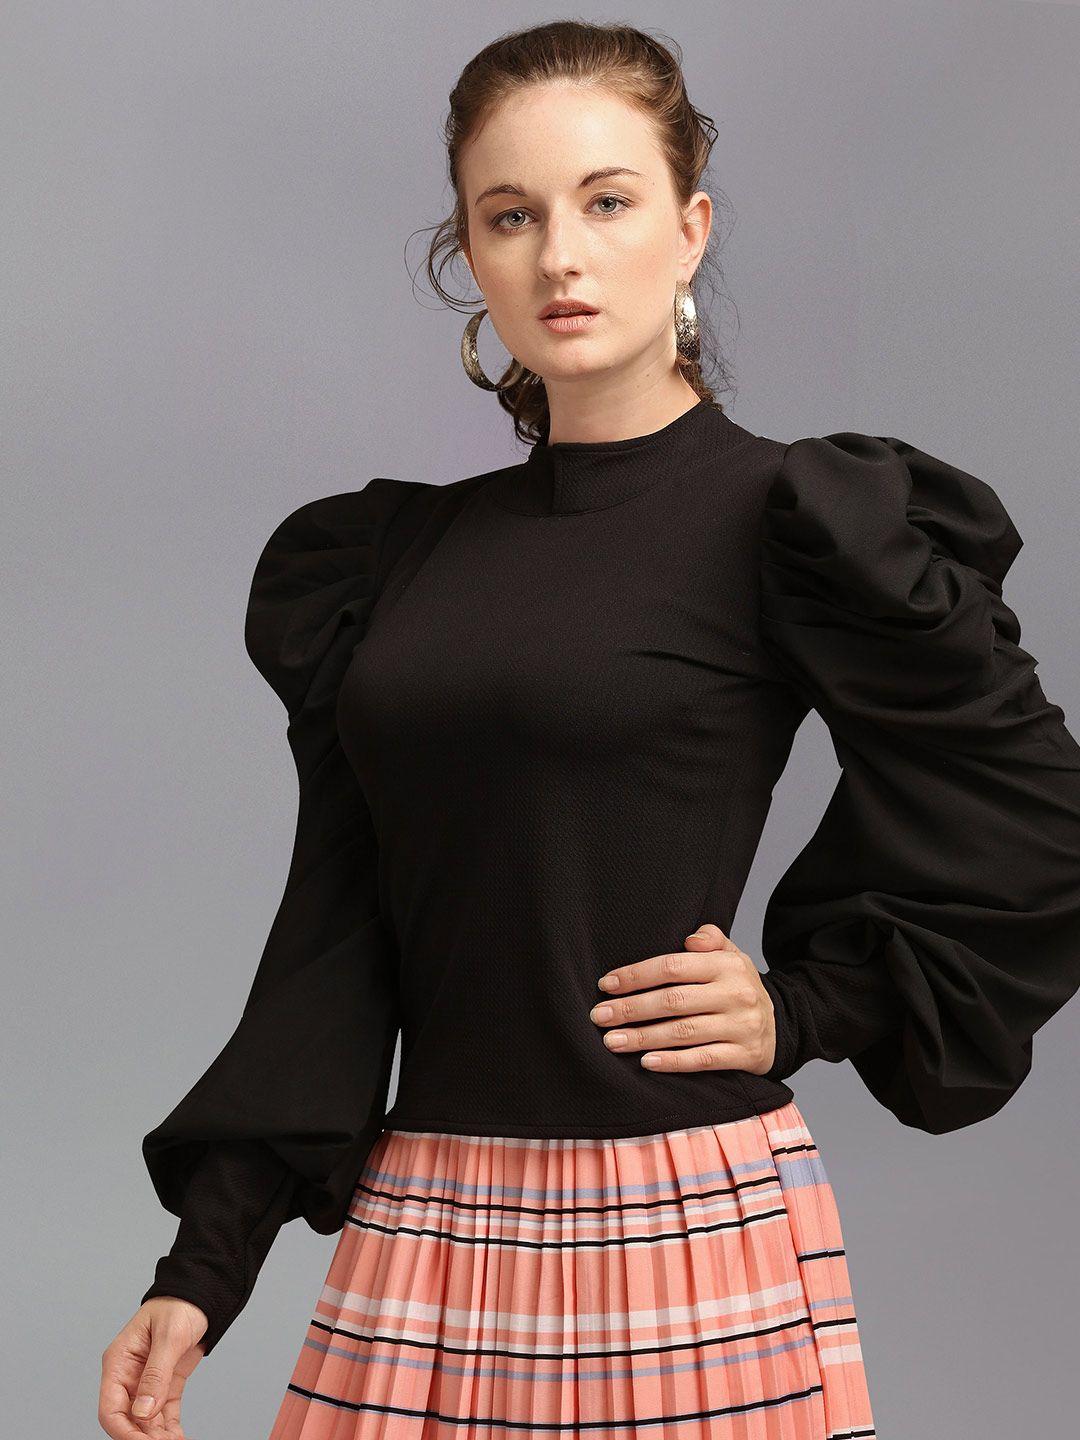 paralians black solid high neck top